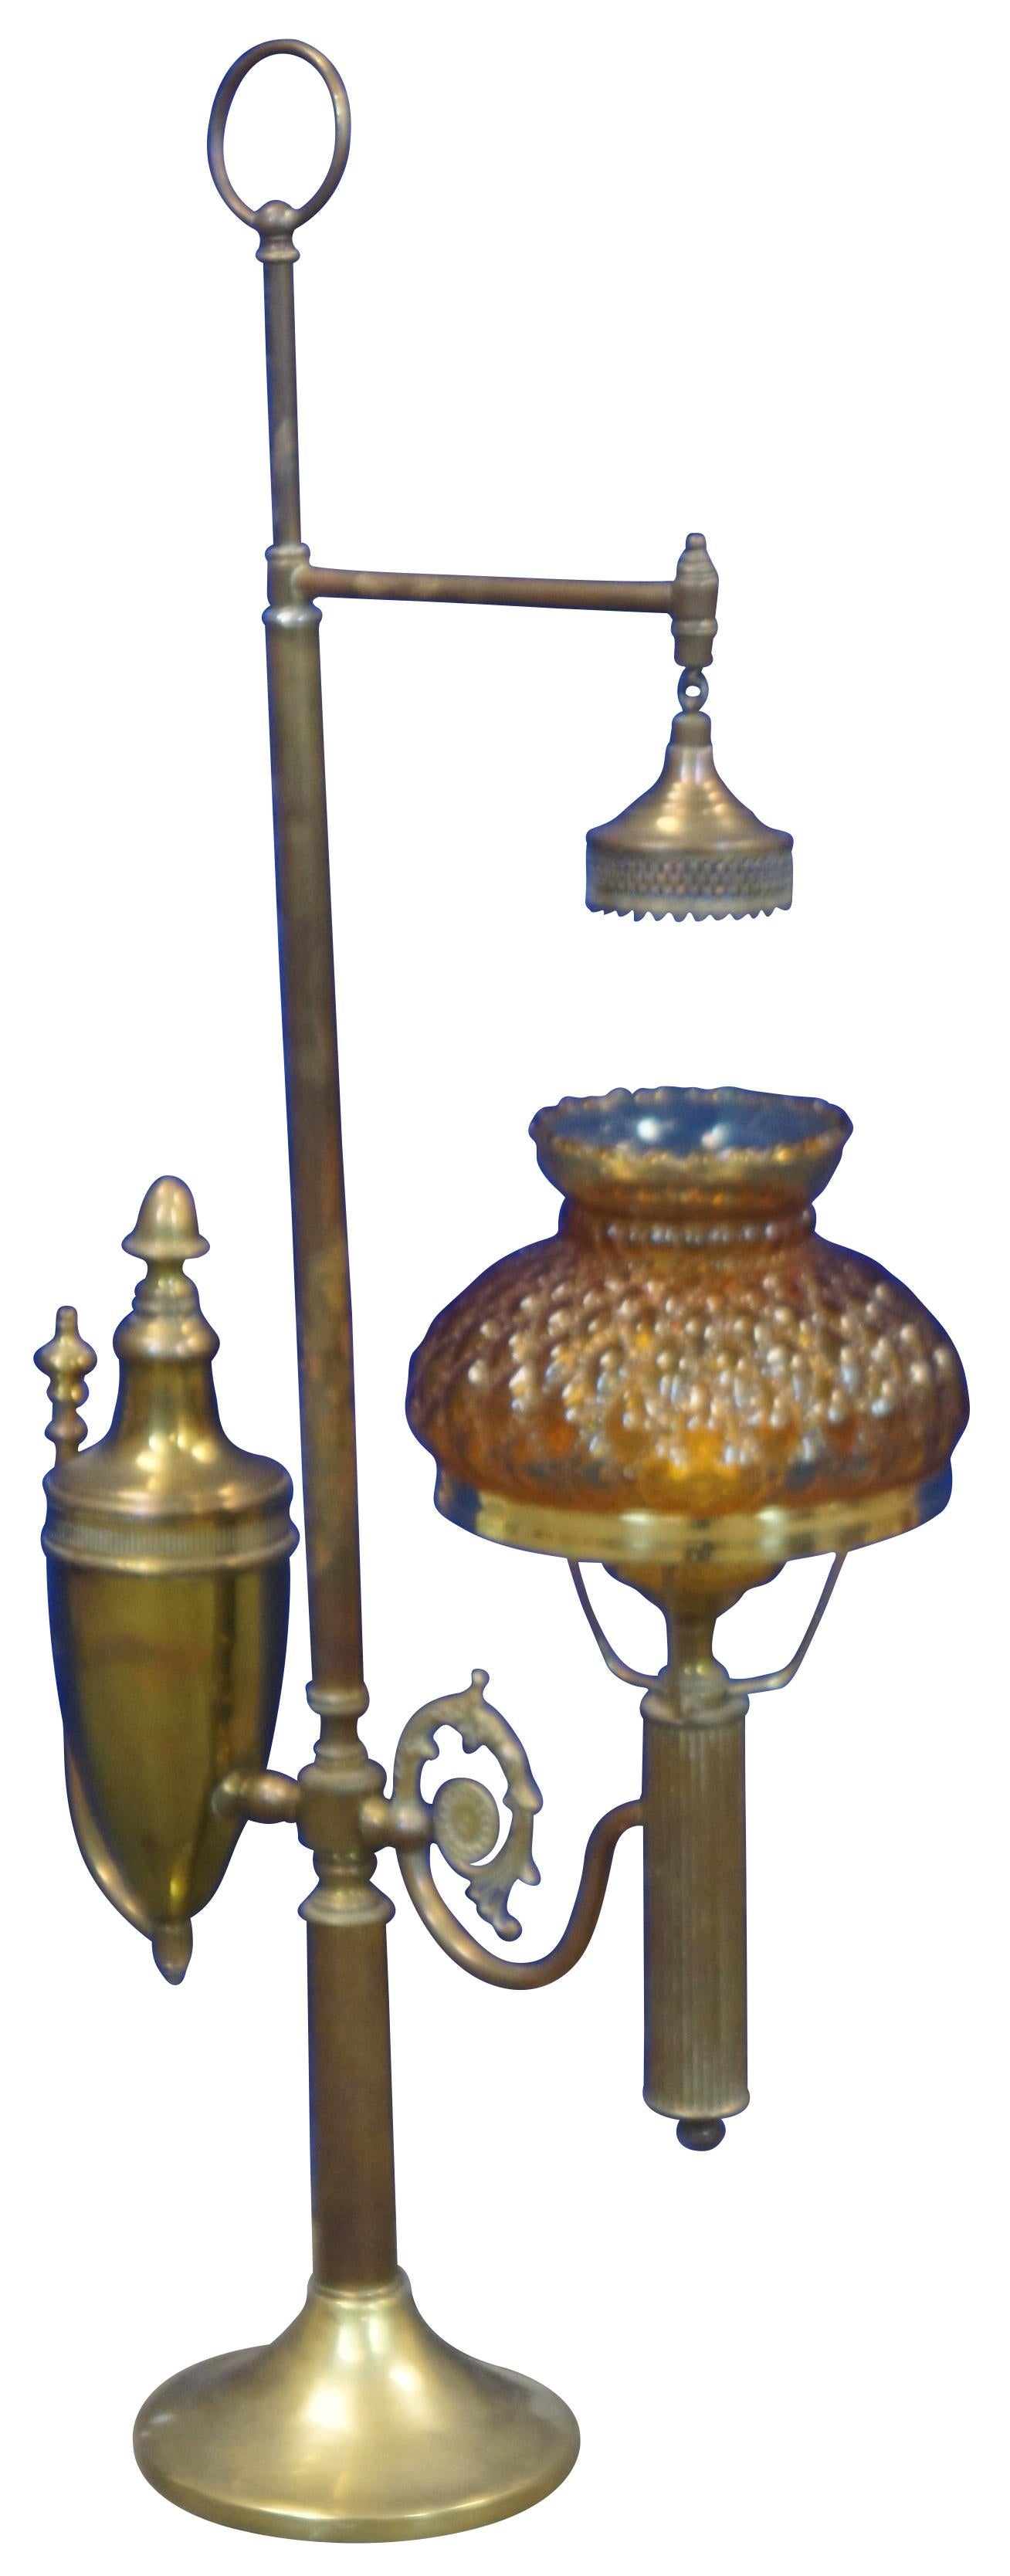 Antique Victorian period converted electric student lamp that originally burned oil or kerosene from a font off to the side to allow light down onto a desk. Features a brass body with a quilted hobnail amber glass shade. Measure 31